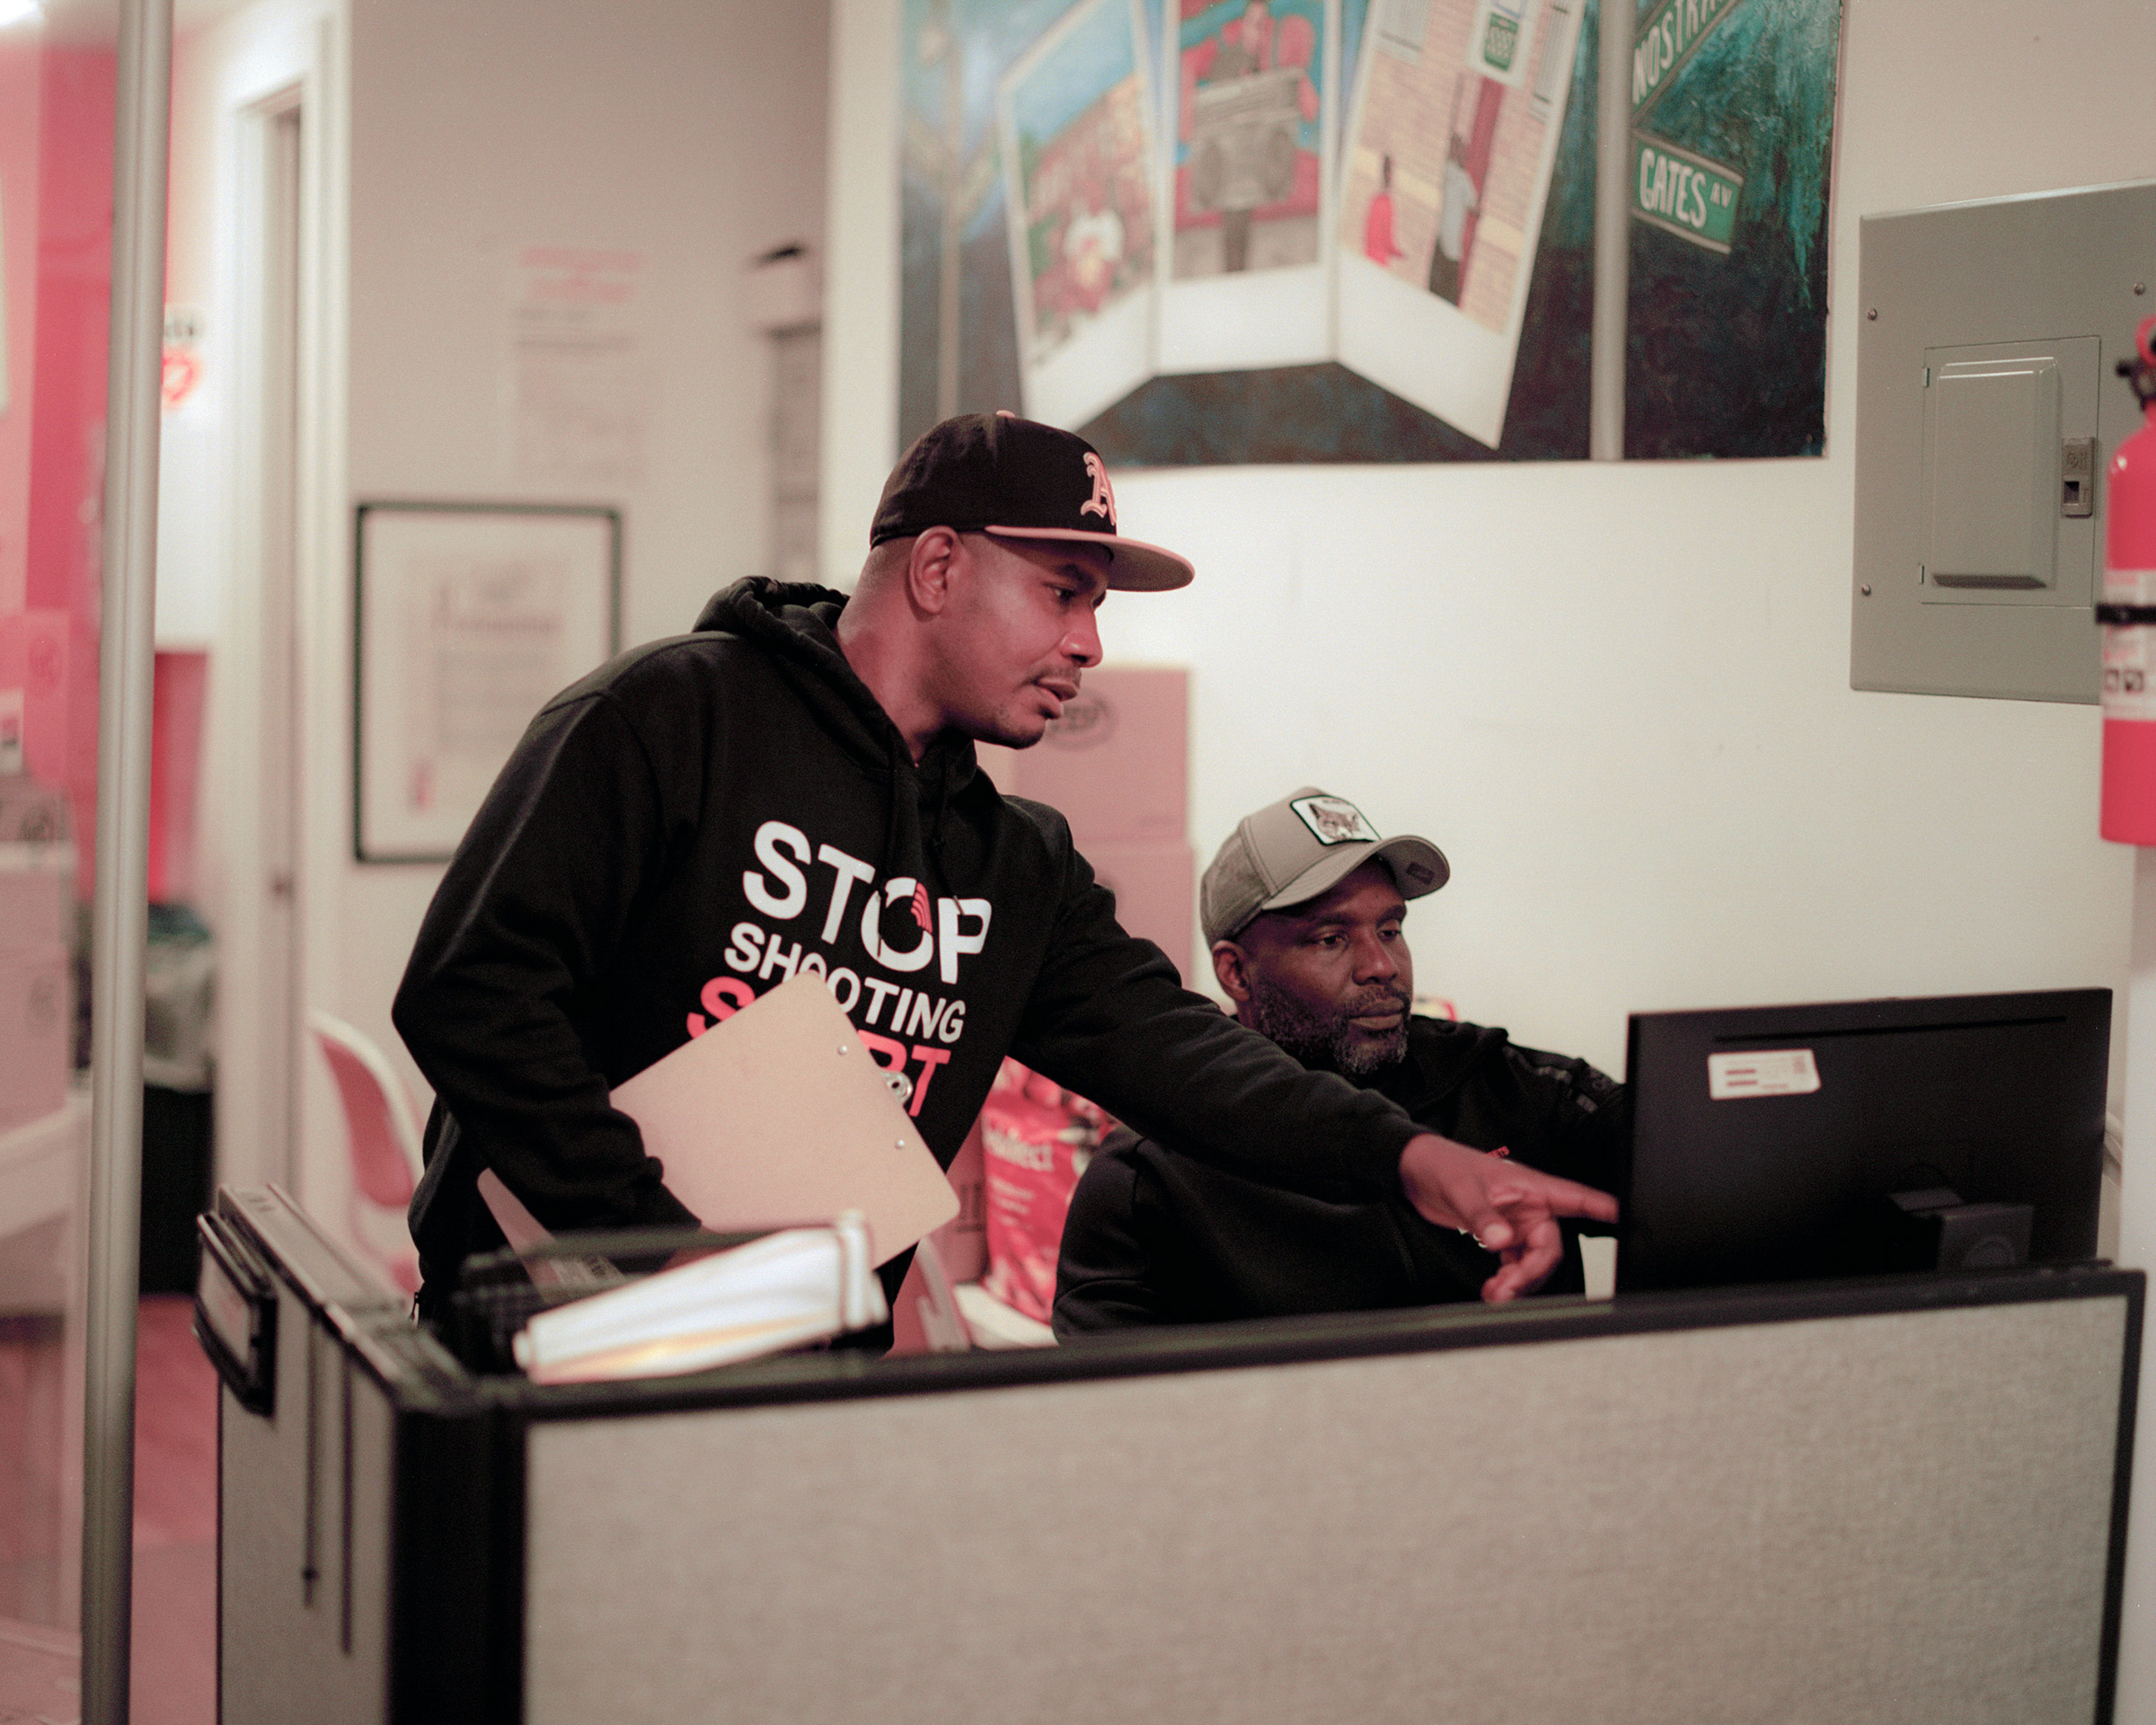 Rahson Johnson, left, and Joshua Simon, right, work in the S.O.S. offices in the Bed-Stuy neighborhood in Brooklyn, New York on October 8, 2021.